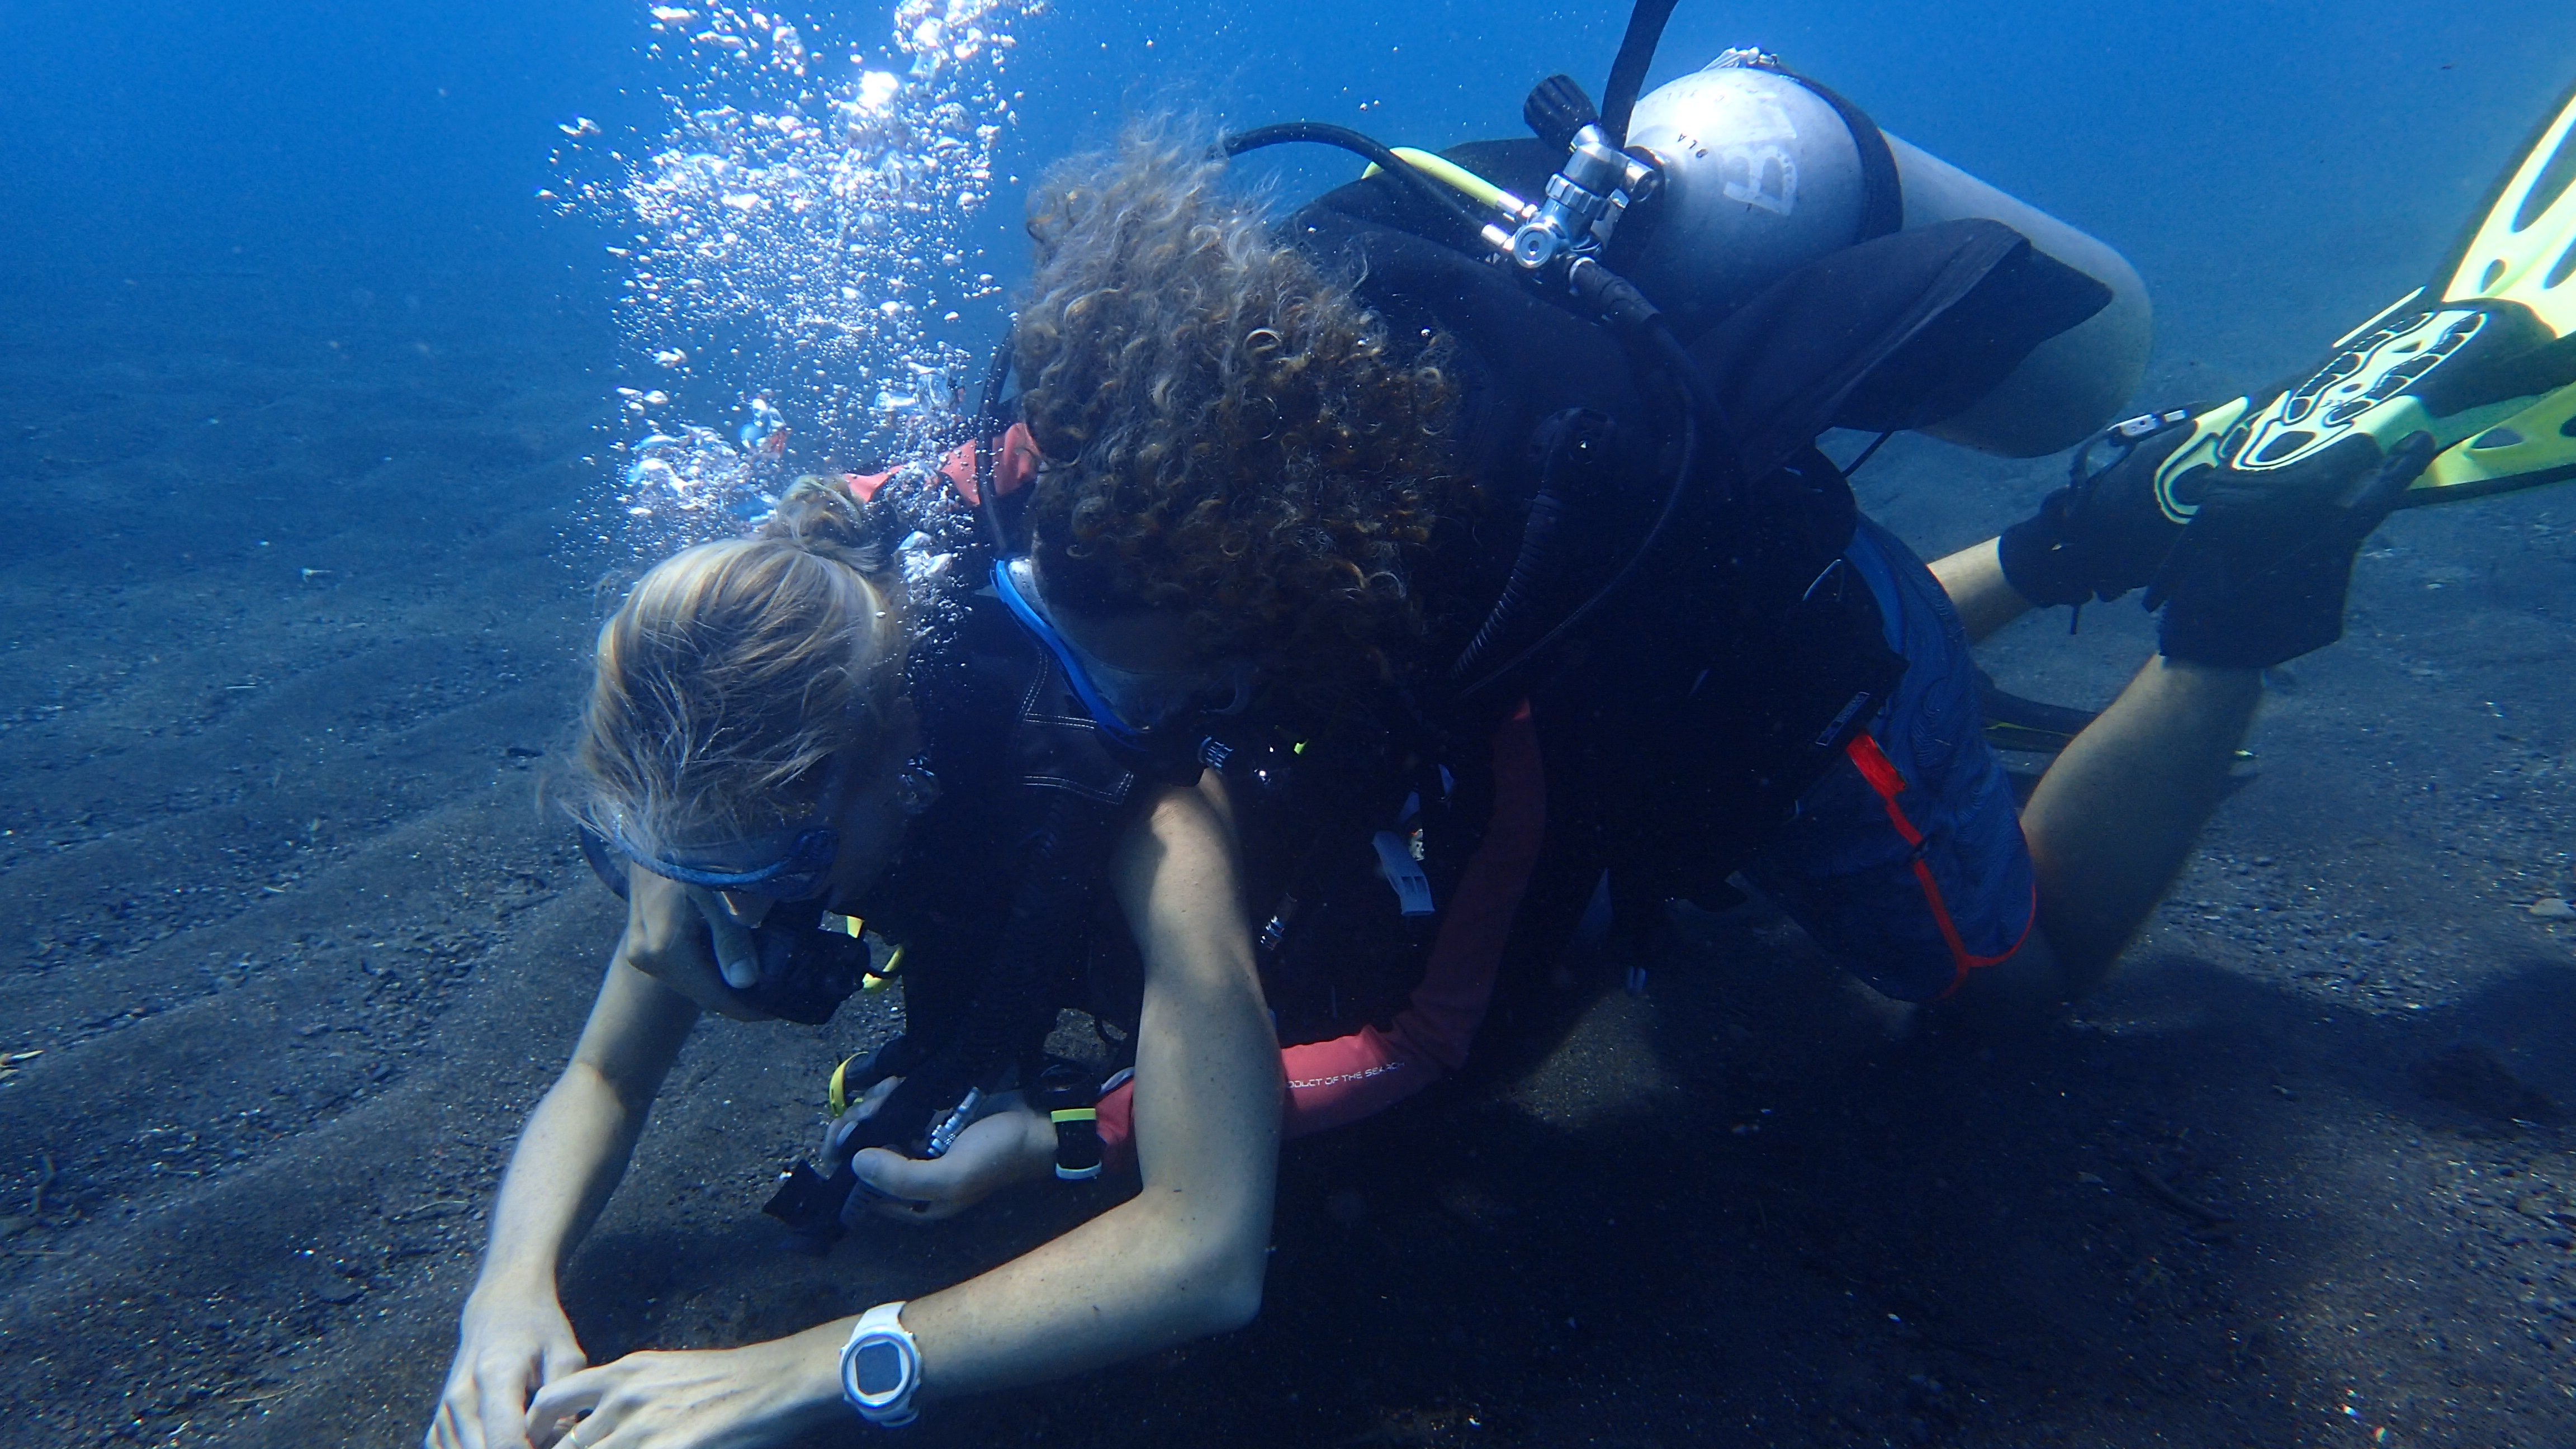 PADI Rescue diver course - Tom rescuing an unresponsive diver from underwater